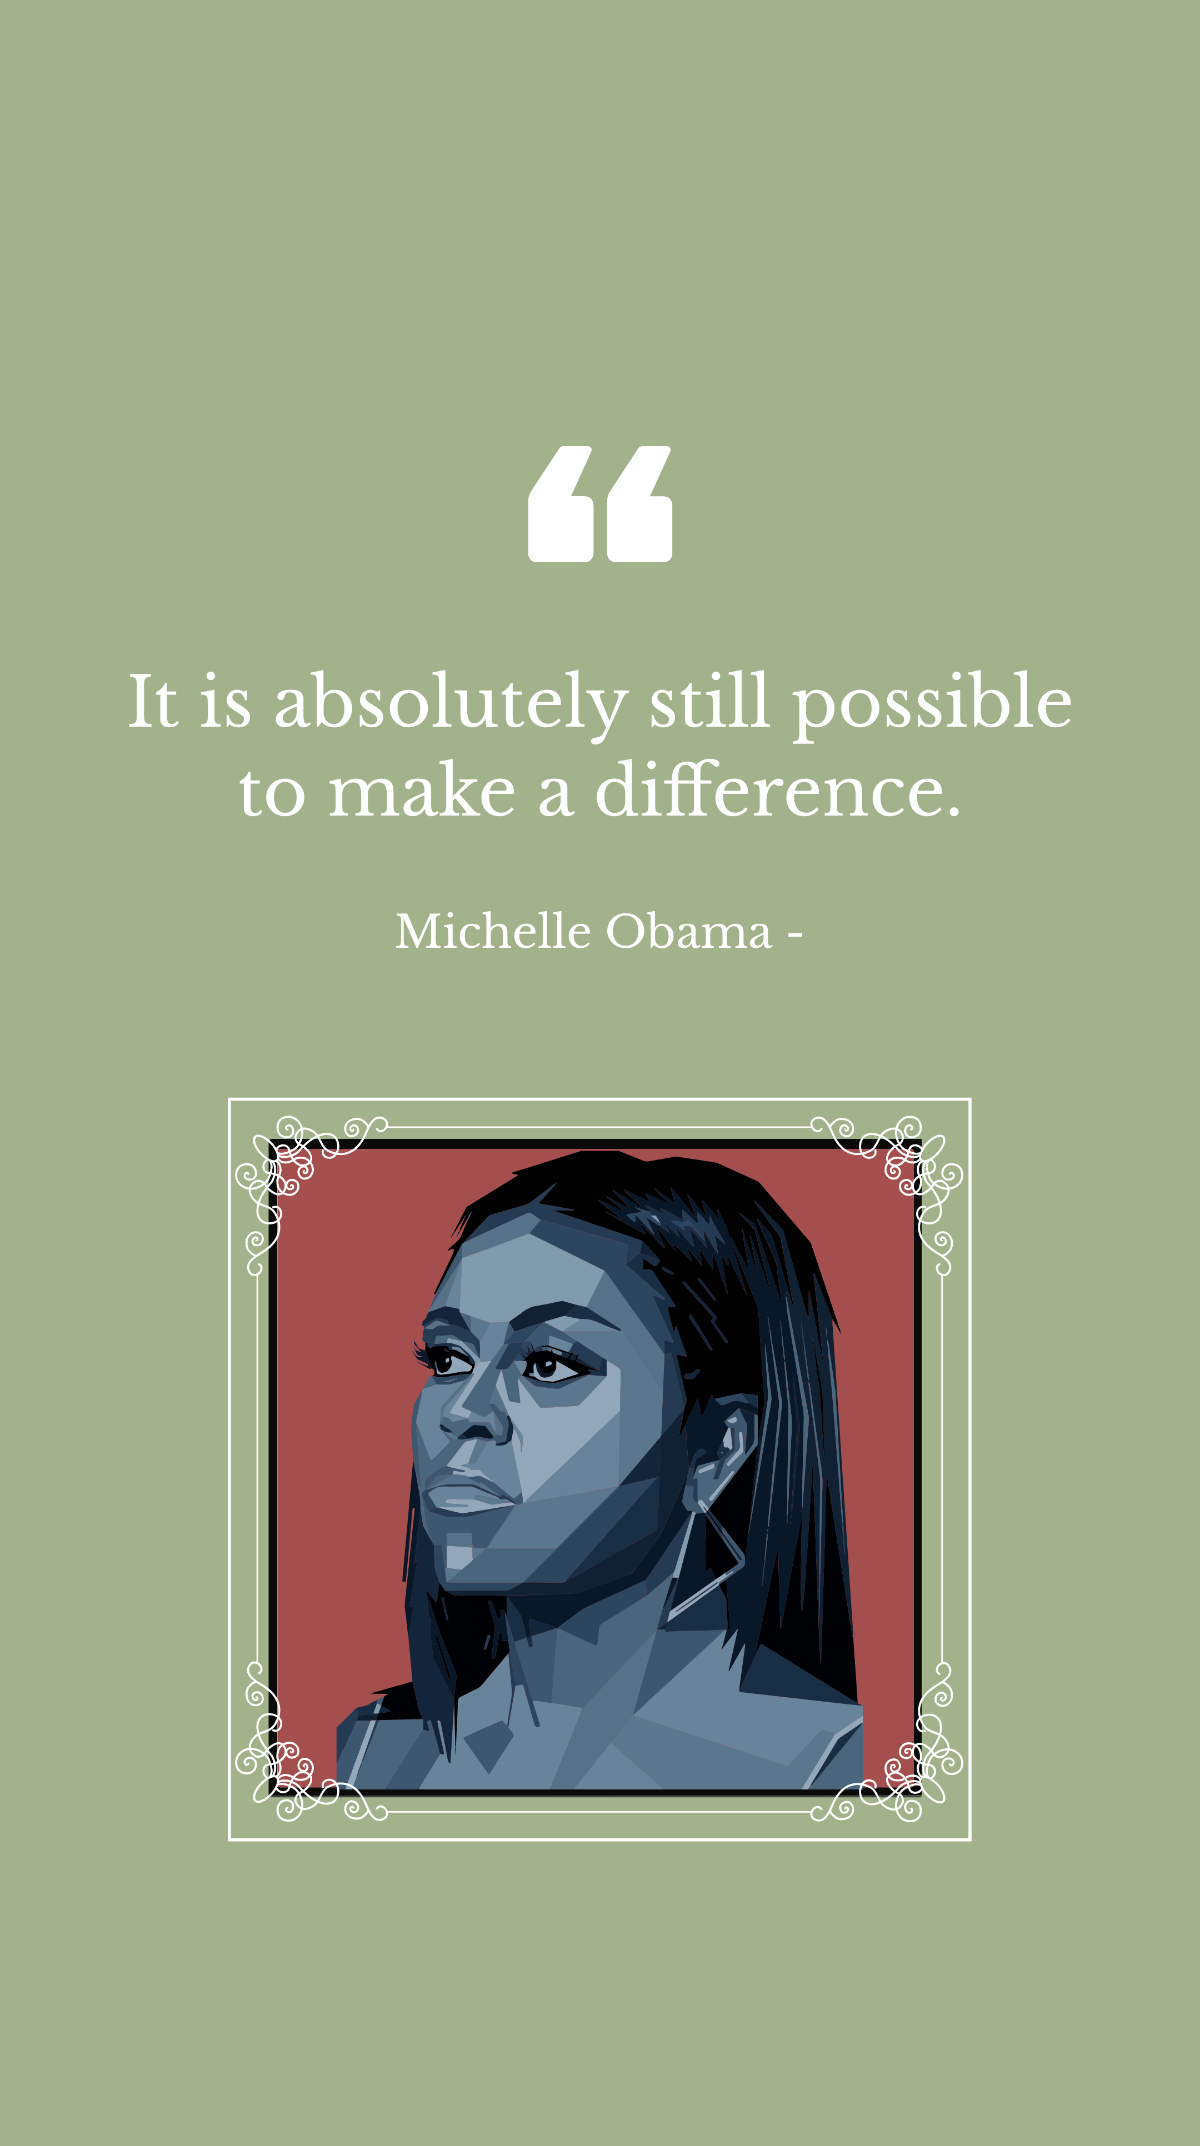 Michelle Obama - It is absolutely still possible to make a difference. Template